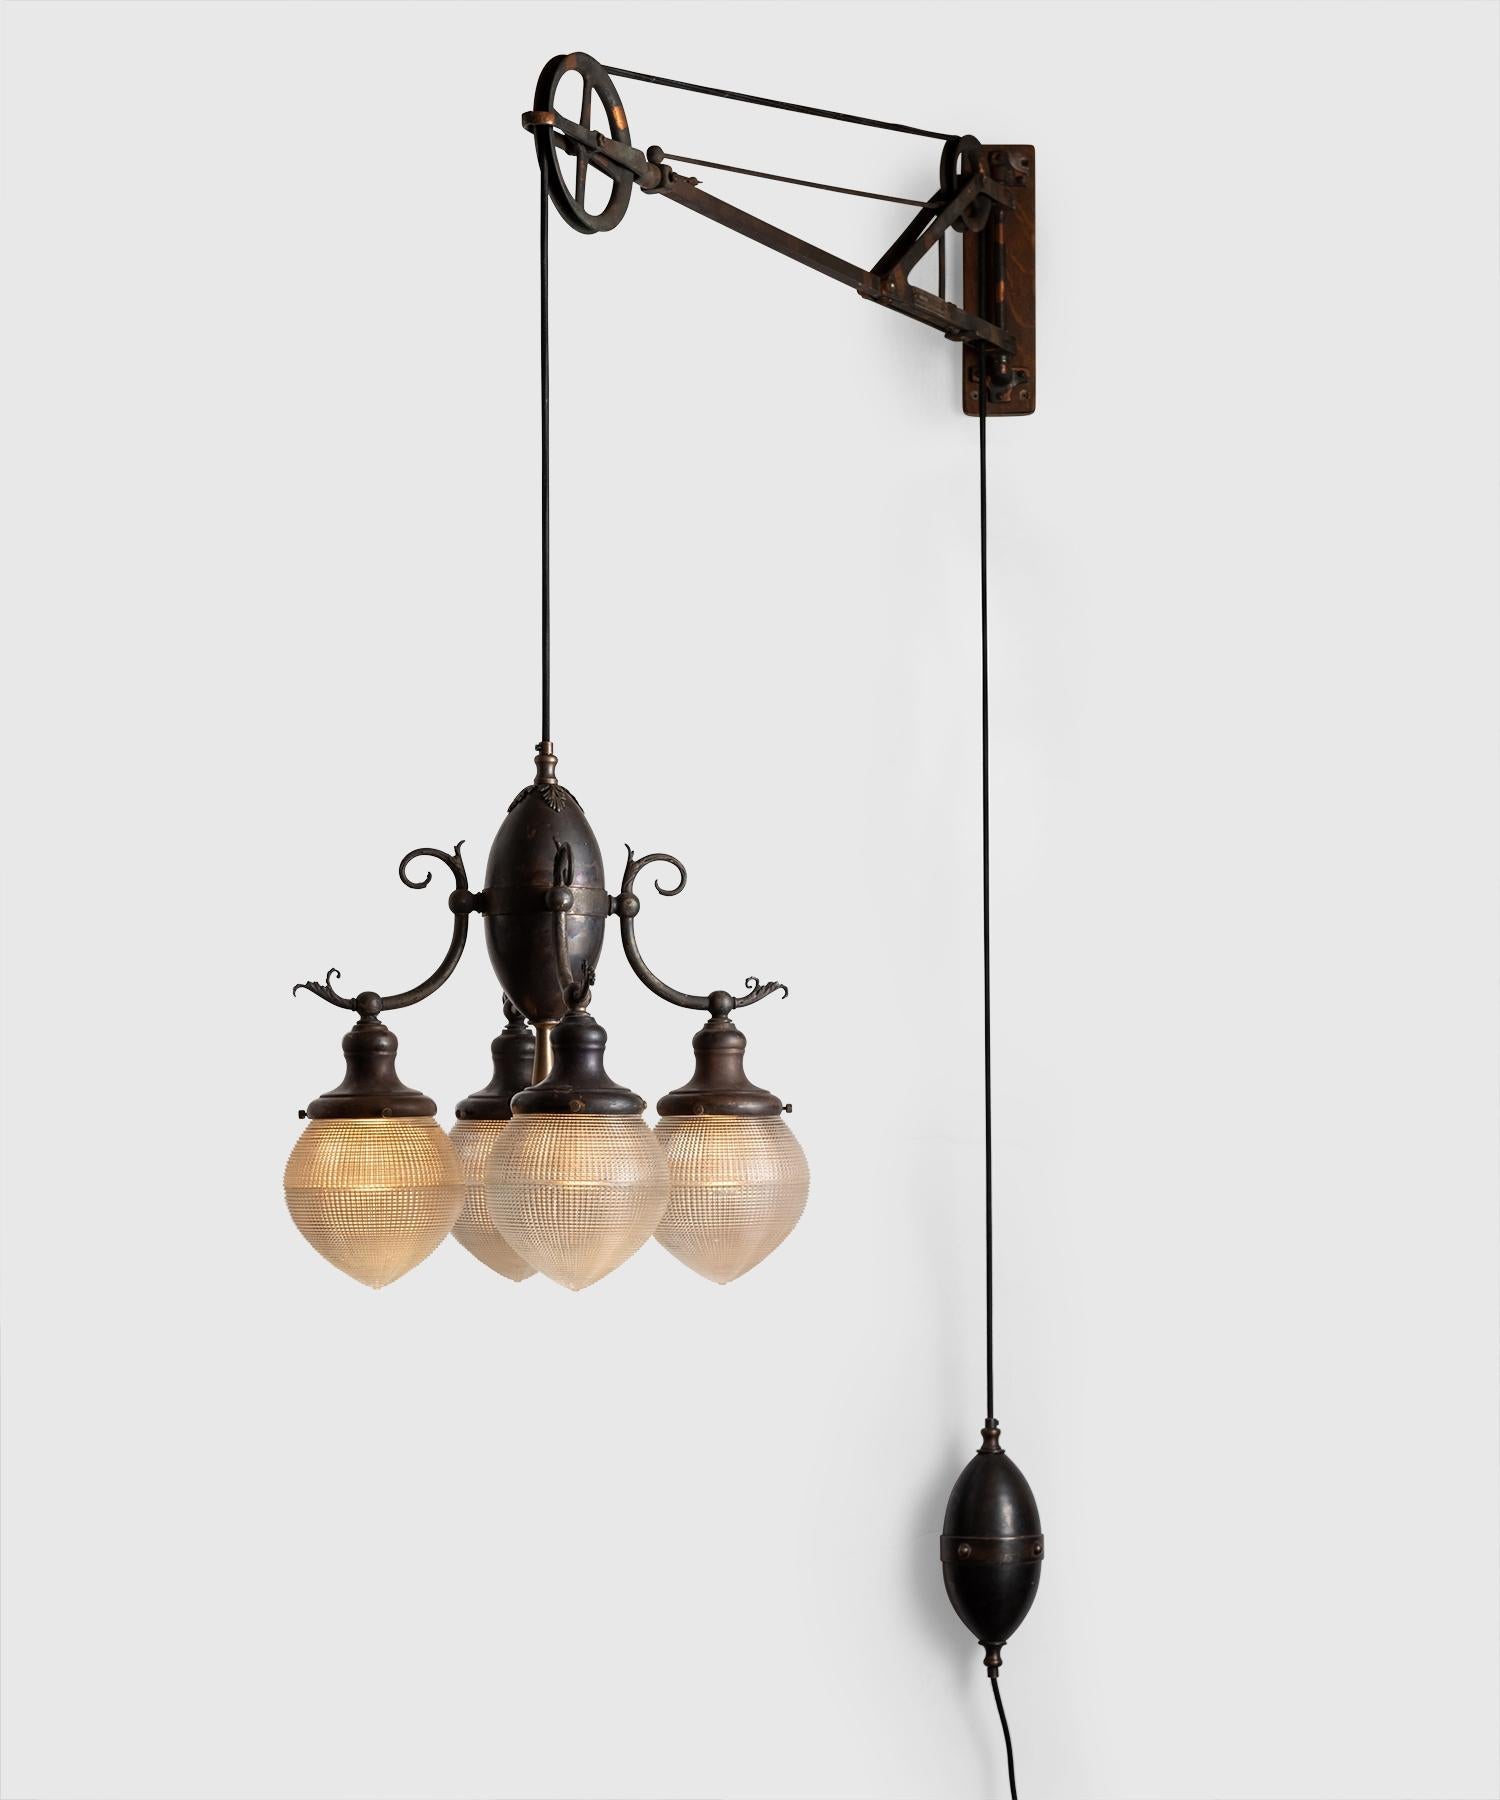 Trenaman swing arm pulley lamp, America circa 1912.

Rare iron dentist lamp with four matching acorn Holophane globes, wooden backplate, and ornate details. Manufactured by Trenaman Dental MFG. CO. in New York.